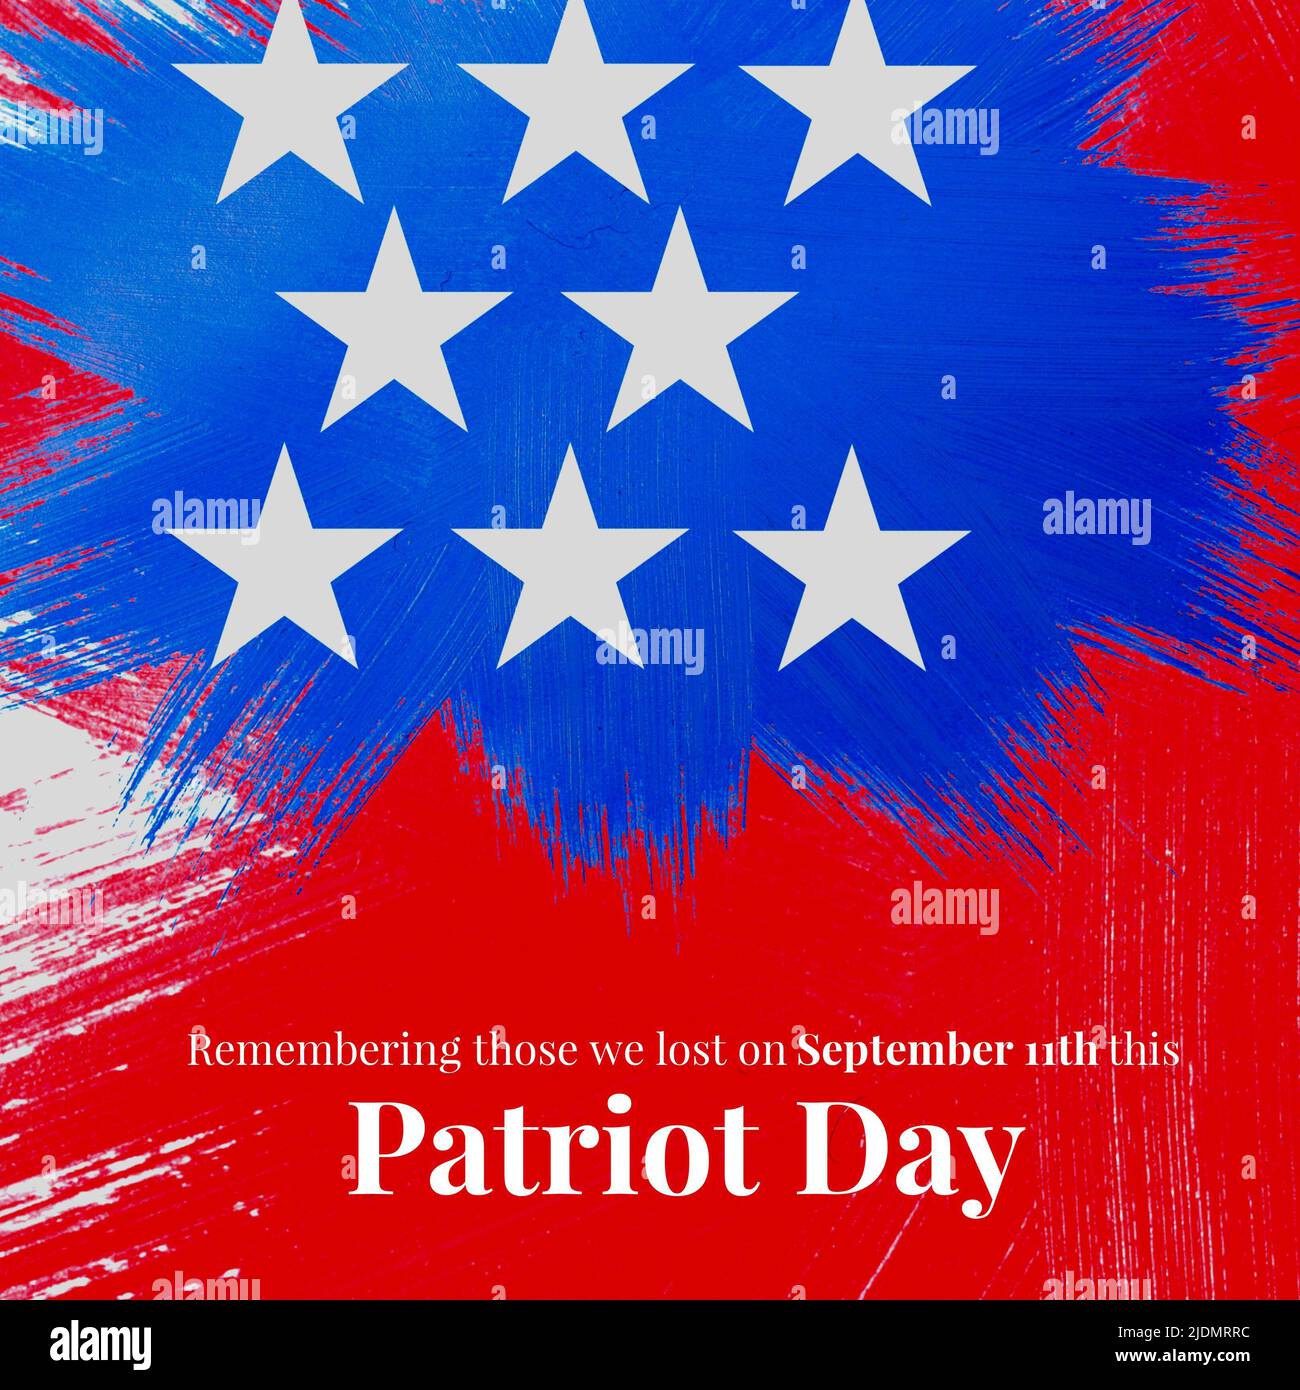 Illustration of remembering those we lost on september 11th this patriot day with star shapes Stock Photo